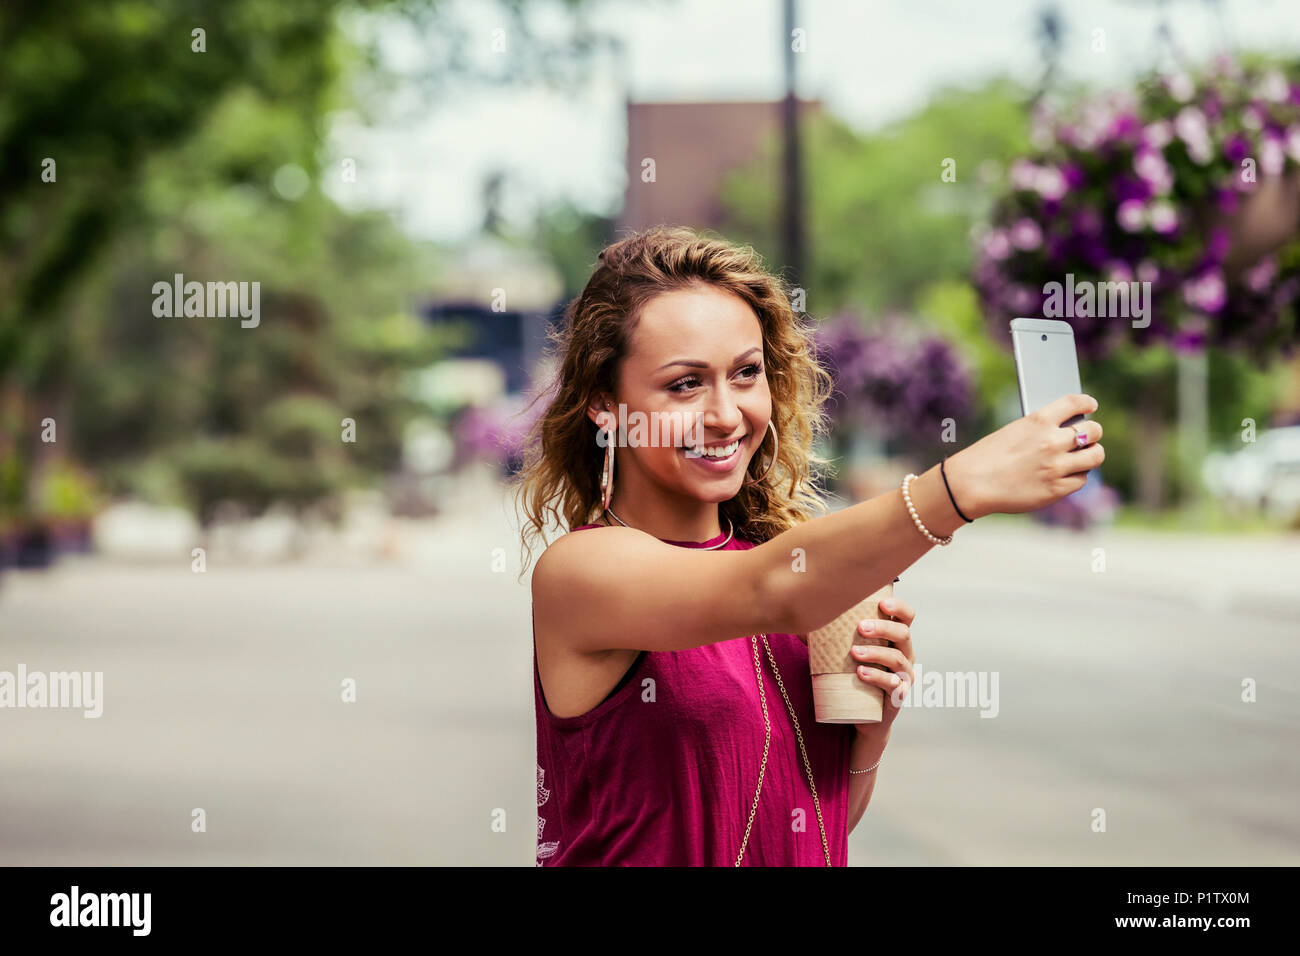 A young beautiful woman takes a self-portrait on a cell phone on a street near a university campus; Edmonton, Alberta, Canada Stock Photo